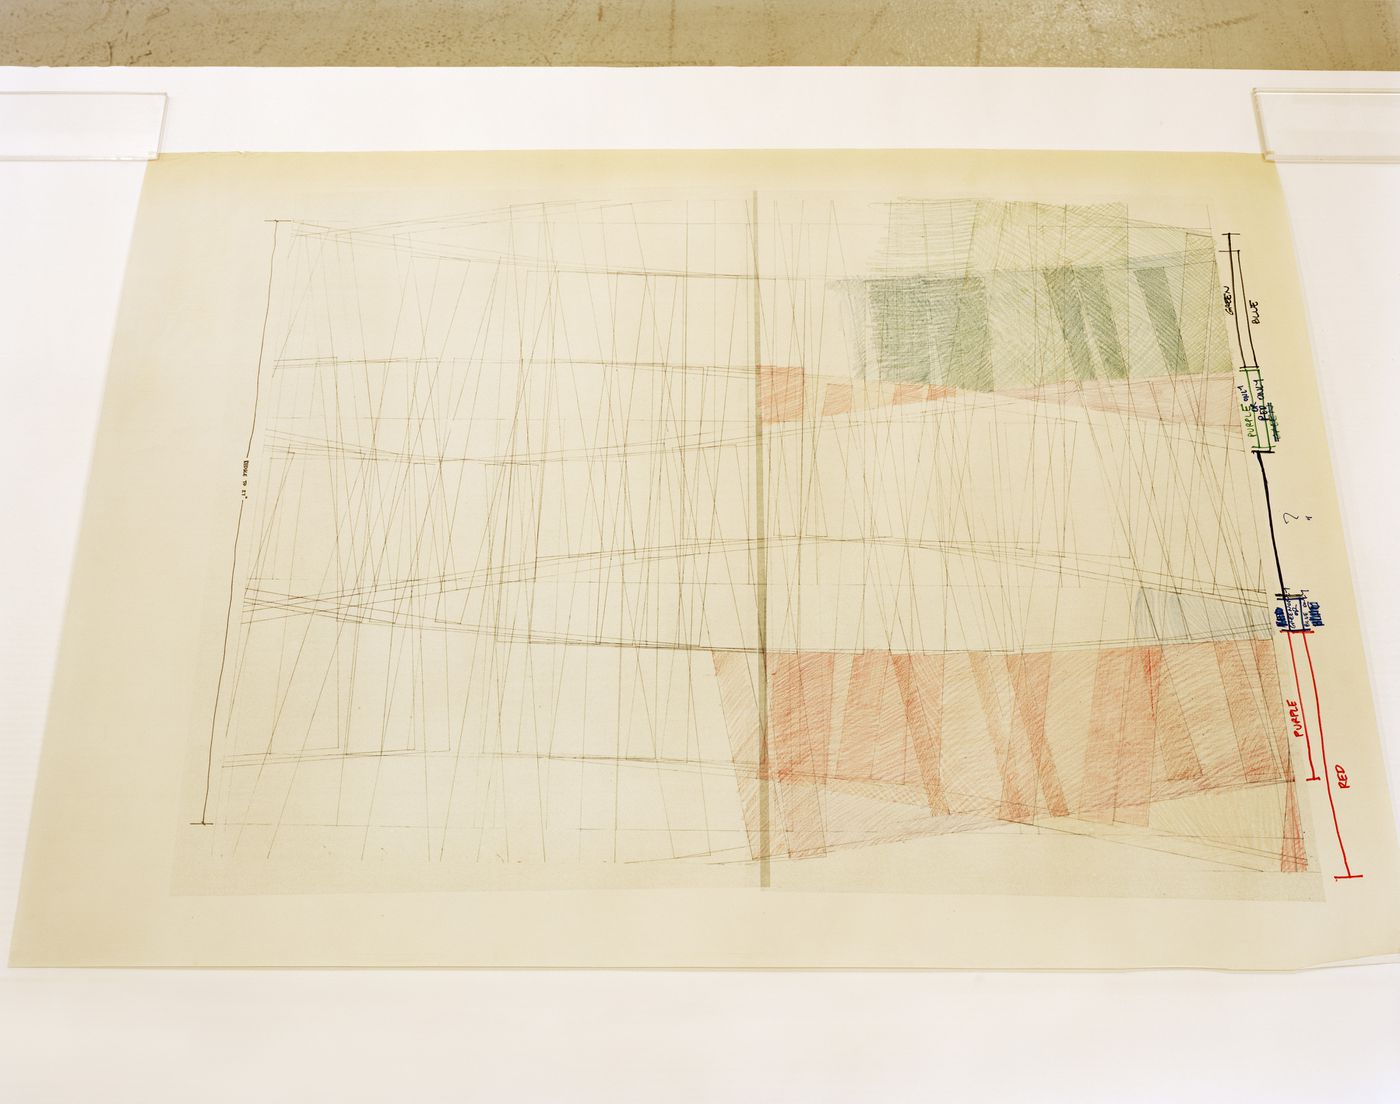 Questioning Pictures: Photograph of drawing for the Wexner Center for the Visual Arts by Peter Eisenman, 1977-1989